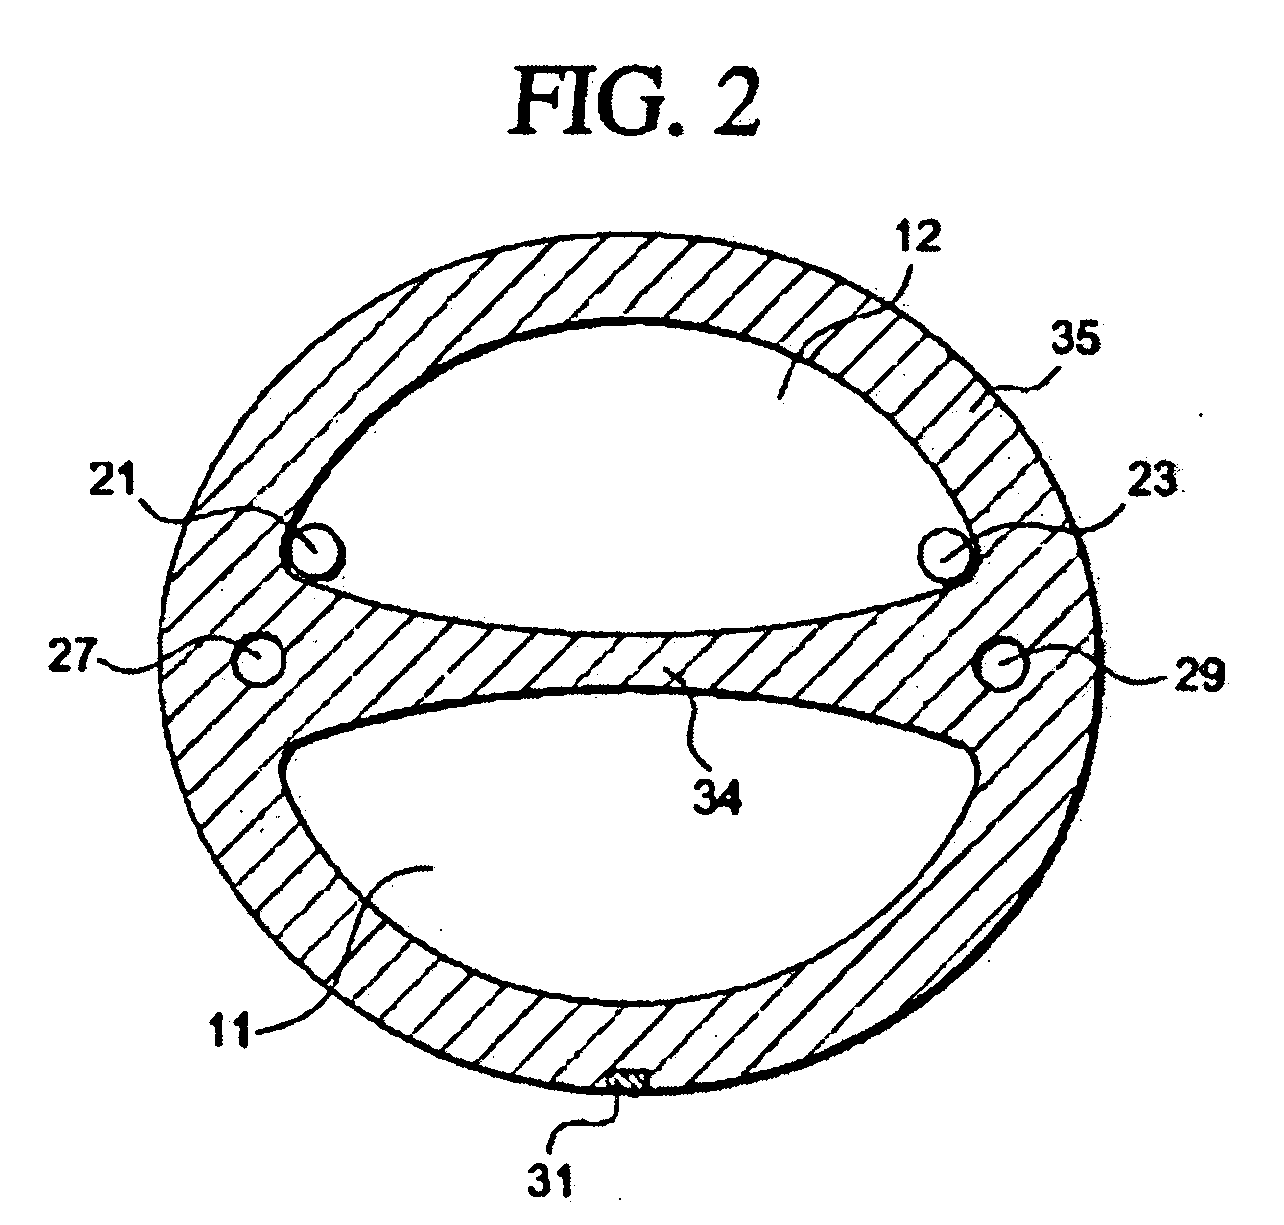 Visualization laryngeal airway apparatus and methods of use